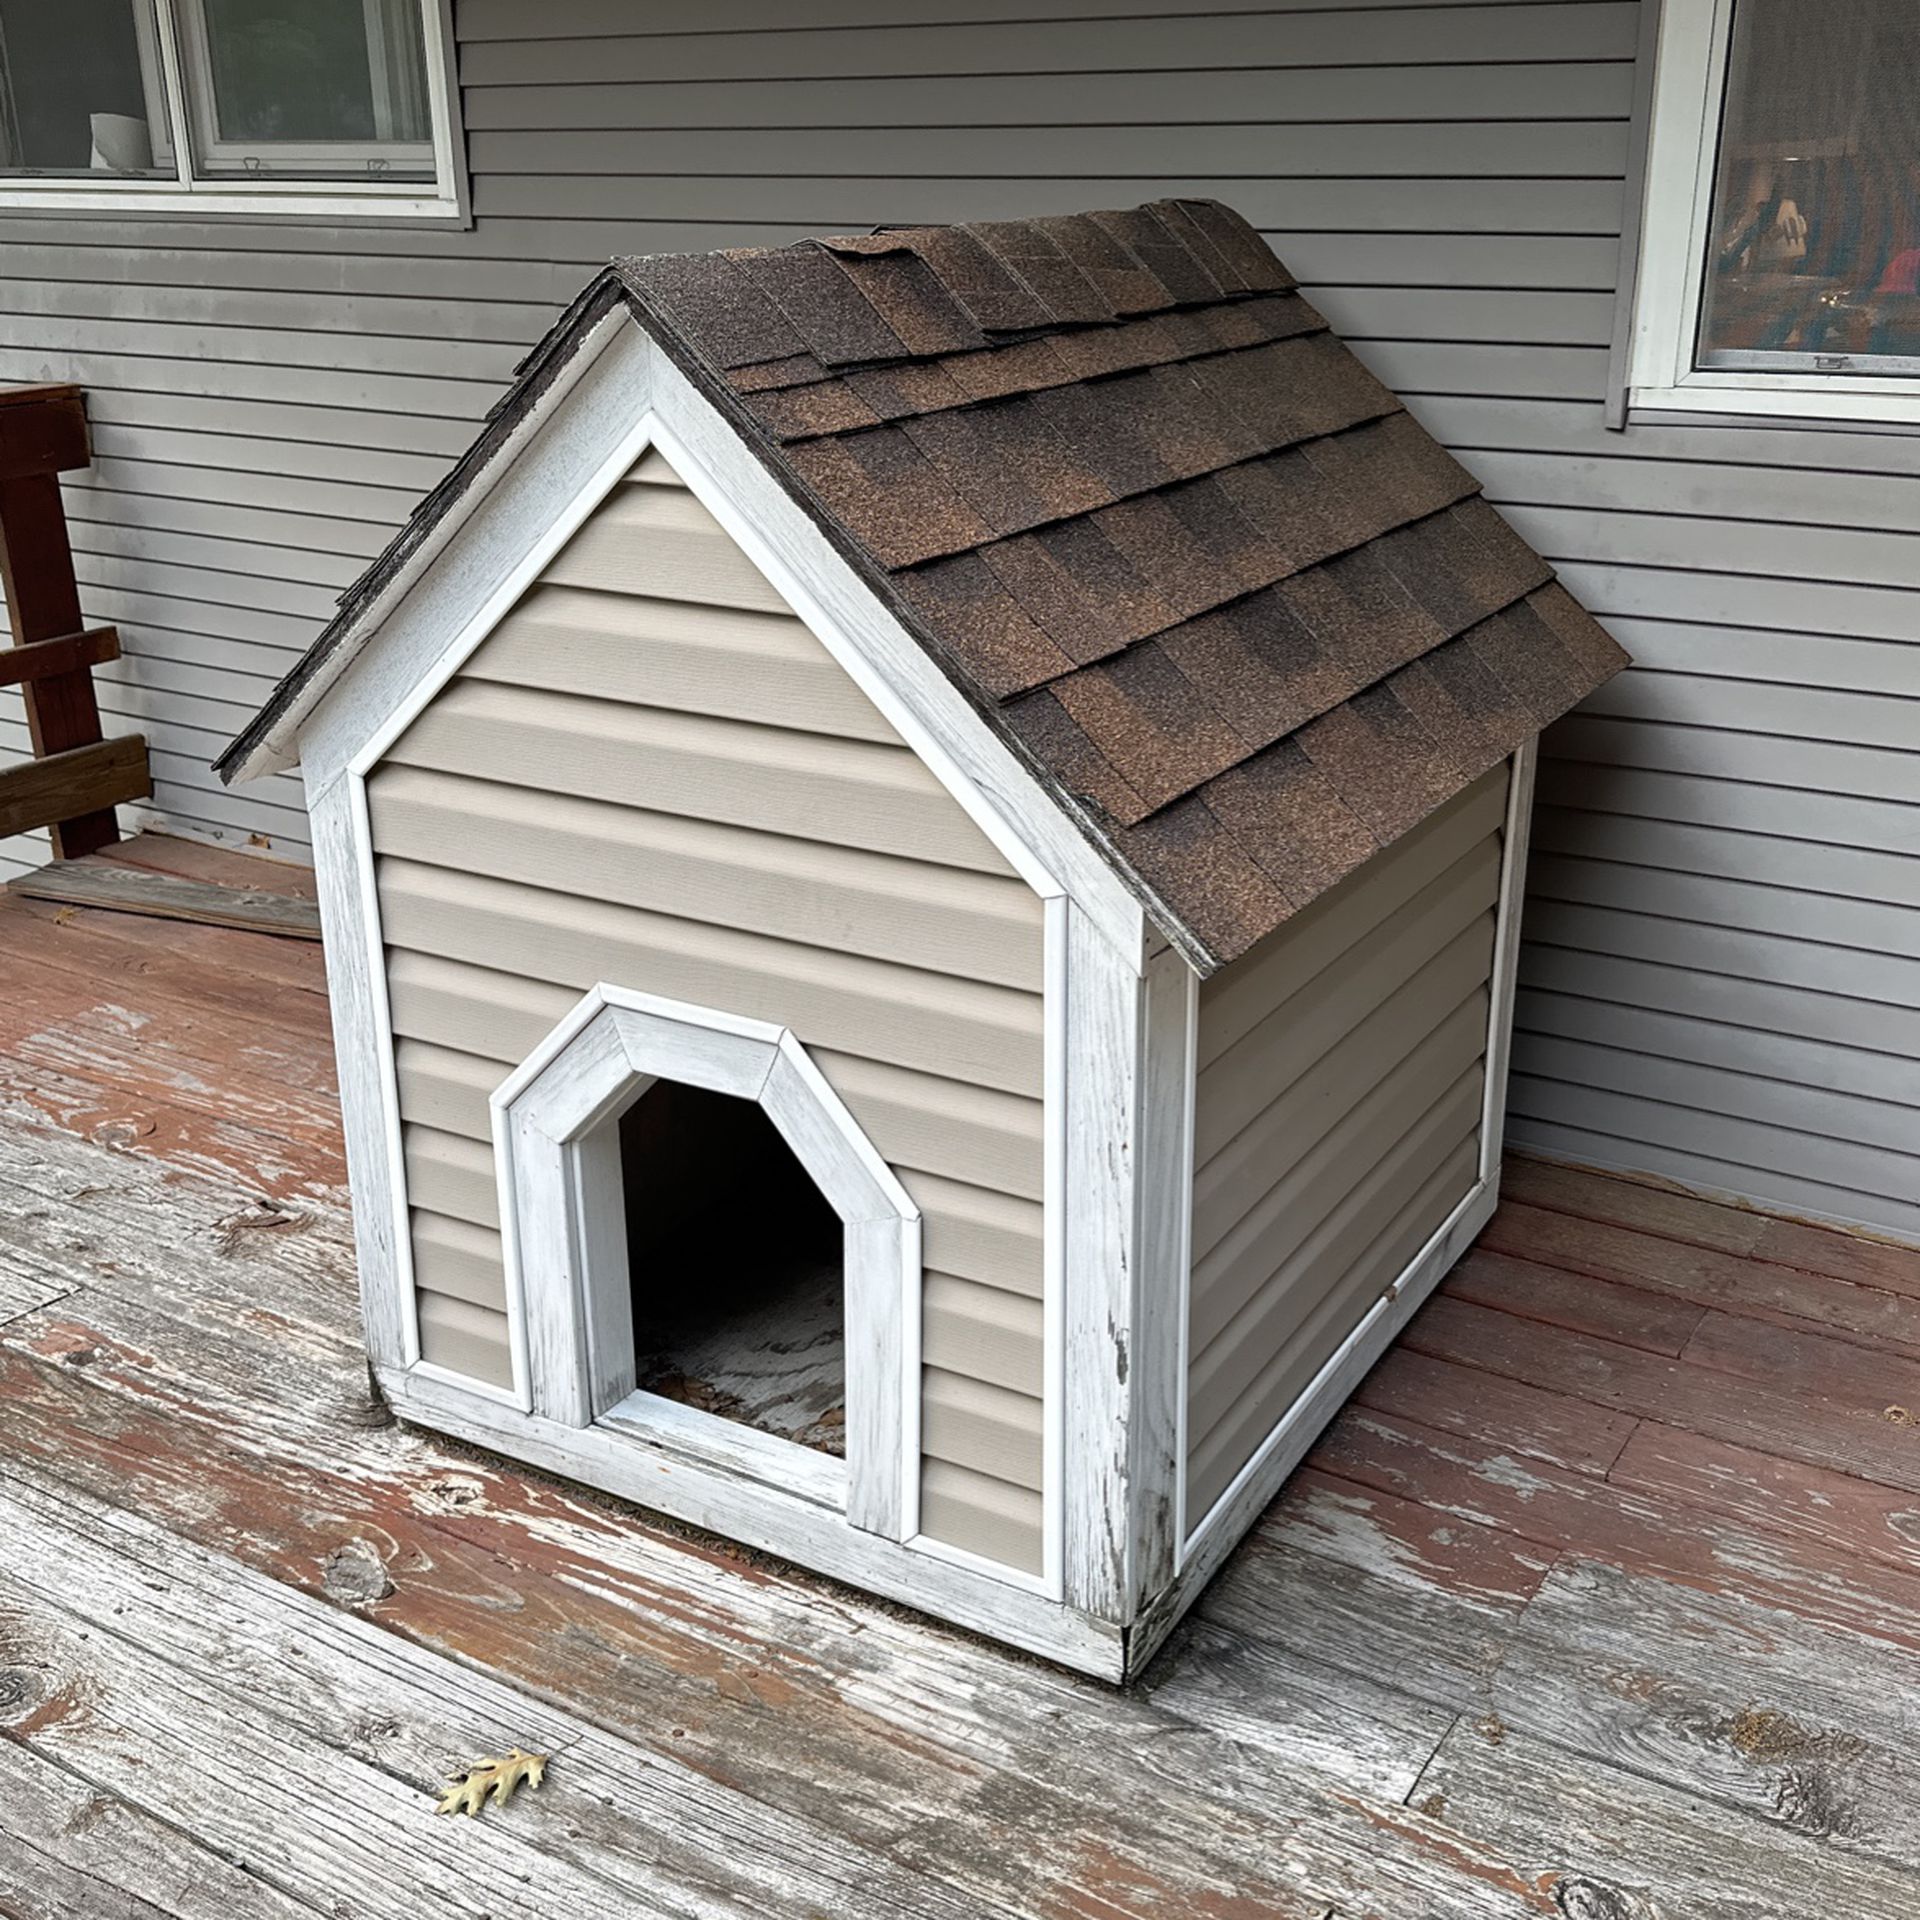 Good Condition Dog House- Shingled Roof And Vinyl Siding 